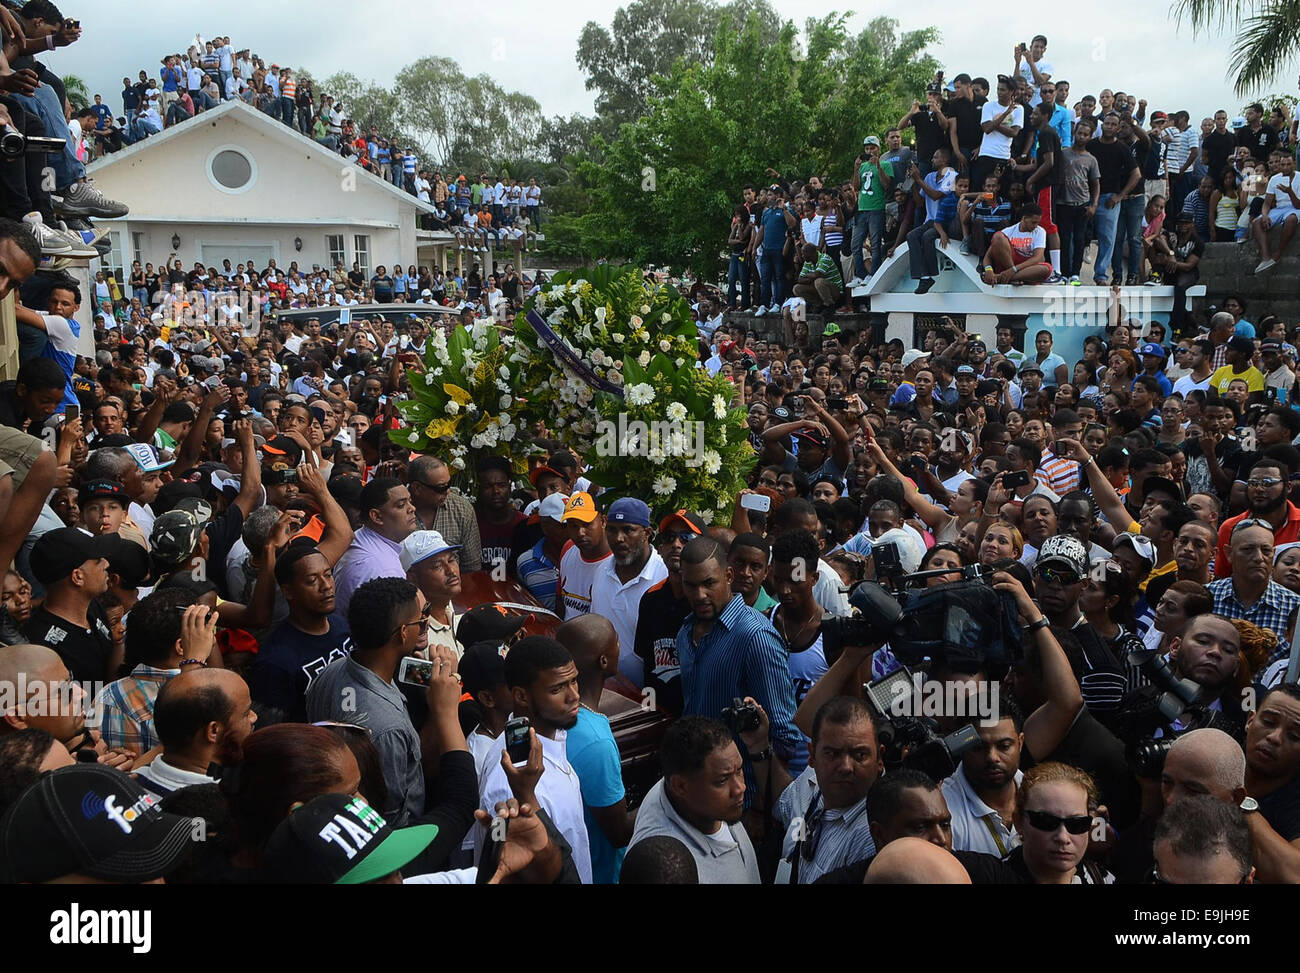 Puerto Plata, Dominican Republic. 28th Oct, 2014. St. Louis Cardinals baseball player Oscar Taveras' funeral is held in the town of Sosua of Puerto Plata province, the Dominican Republic, on Oct. 28, 2014. Oscar Taveras died on Oct. 26 in a car accident. Credit:  Onelio Dominguez/Xinhua/Alamy Live News Stock Photo